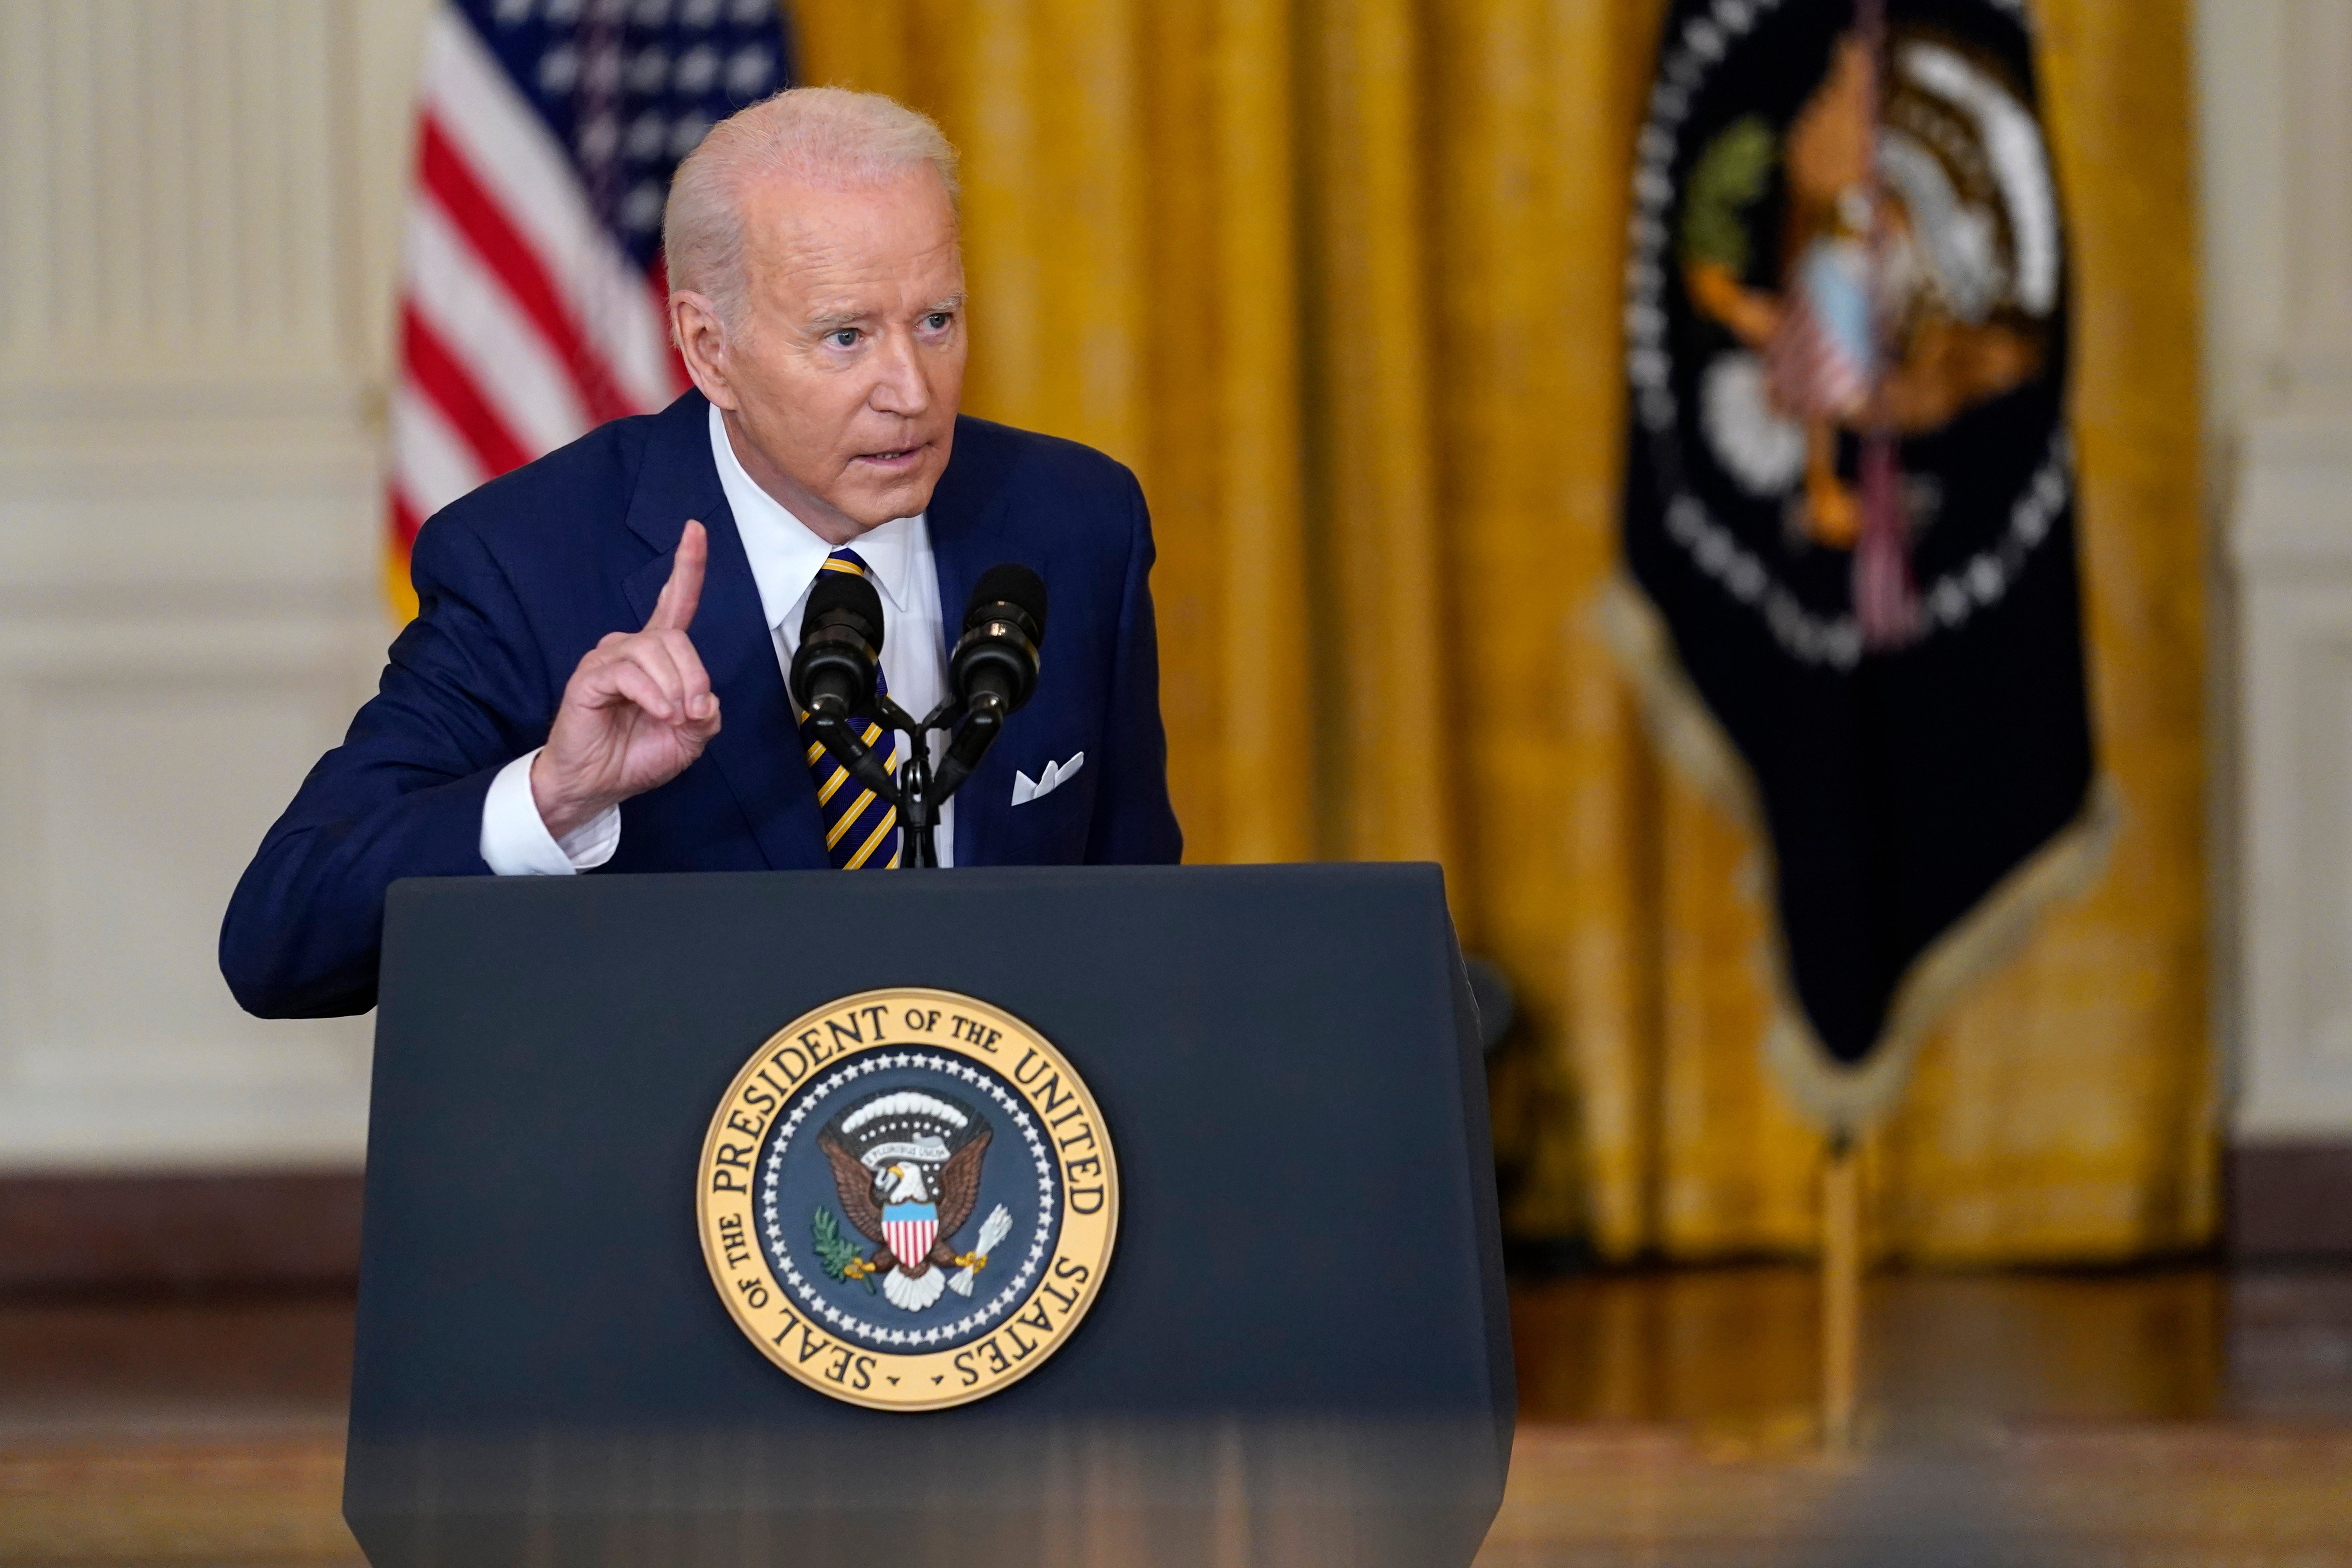 President Joe Biden speaks during a news conference in the East Room of the White House in Washington, Wednesday, Jan. 19, 2022